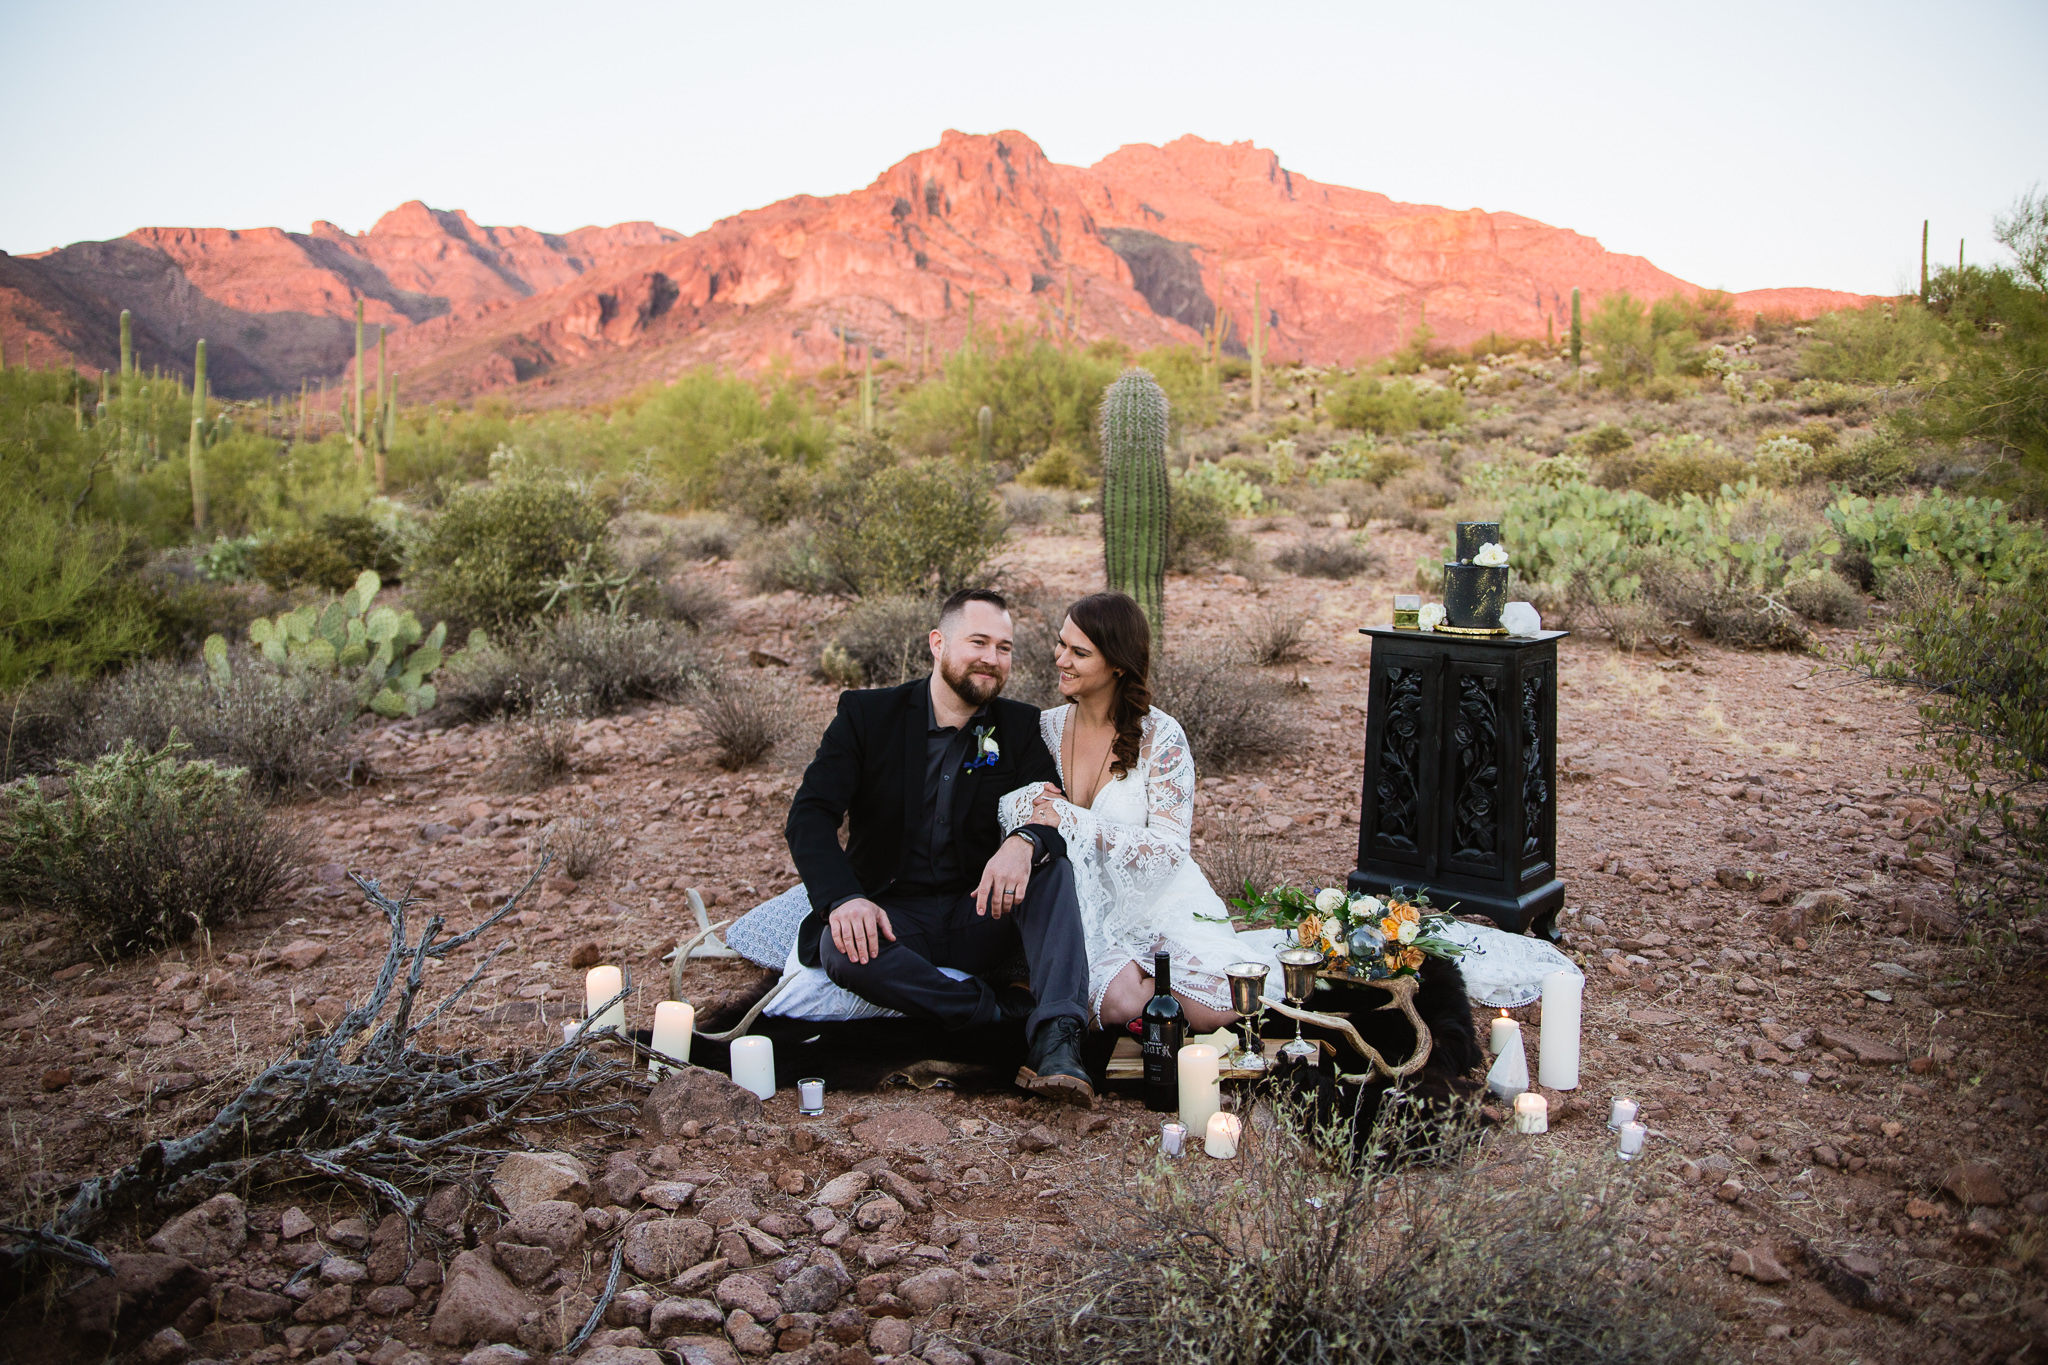 Witchy bohemian inspired bride and groom sharing hors d'oevres and wine at a Superstition Mountains styled wedding surrounded by the beauty of the desert.